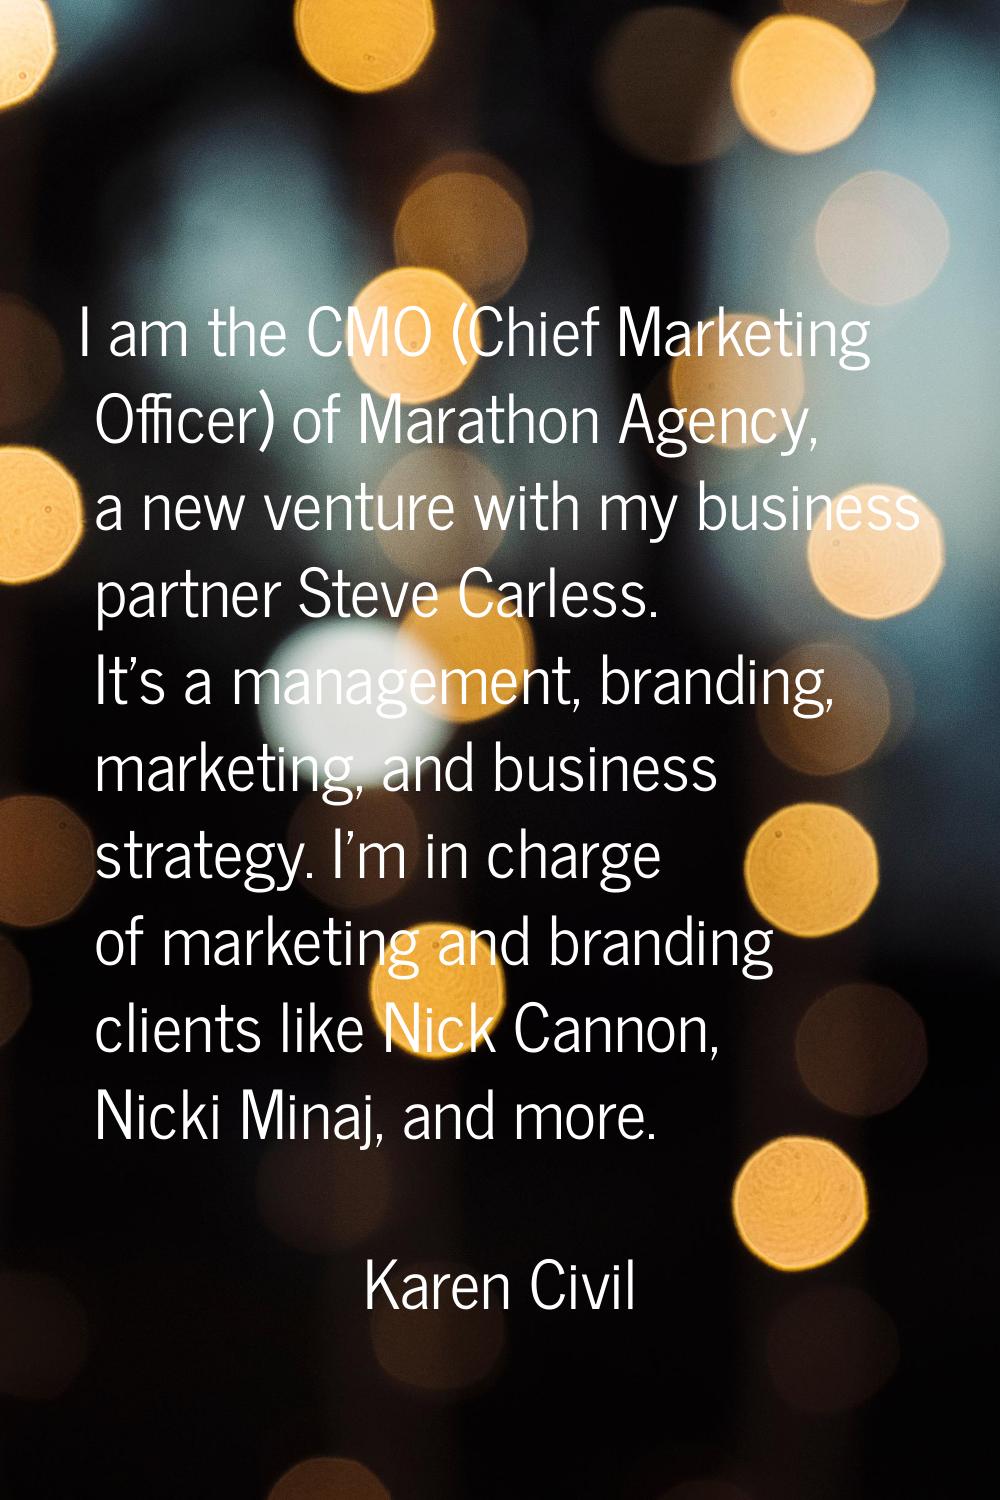 I am the CMO (Chief Marketing Officer) of Marathon Agency, a new venture with my business partner S